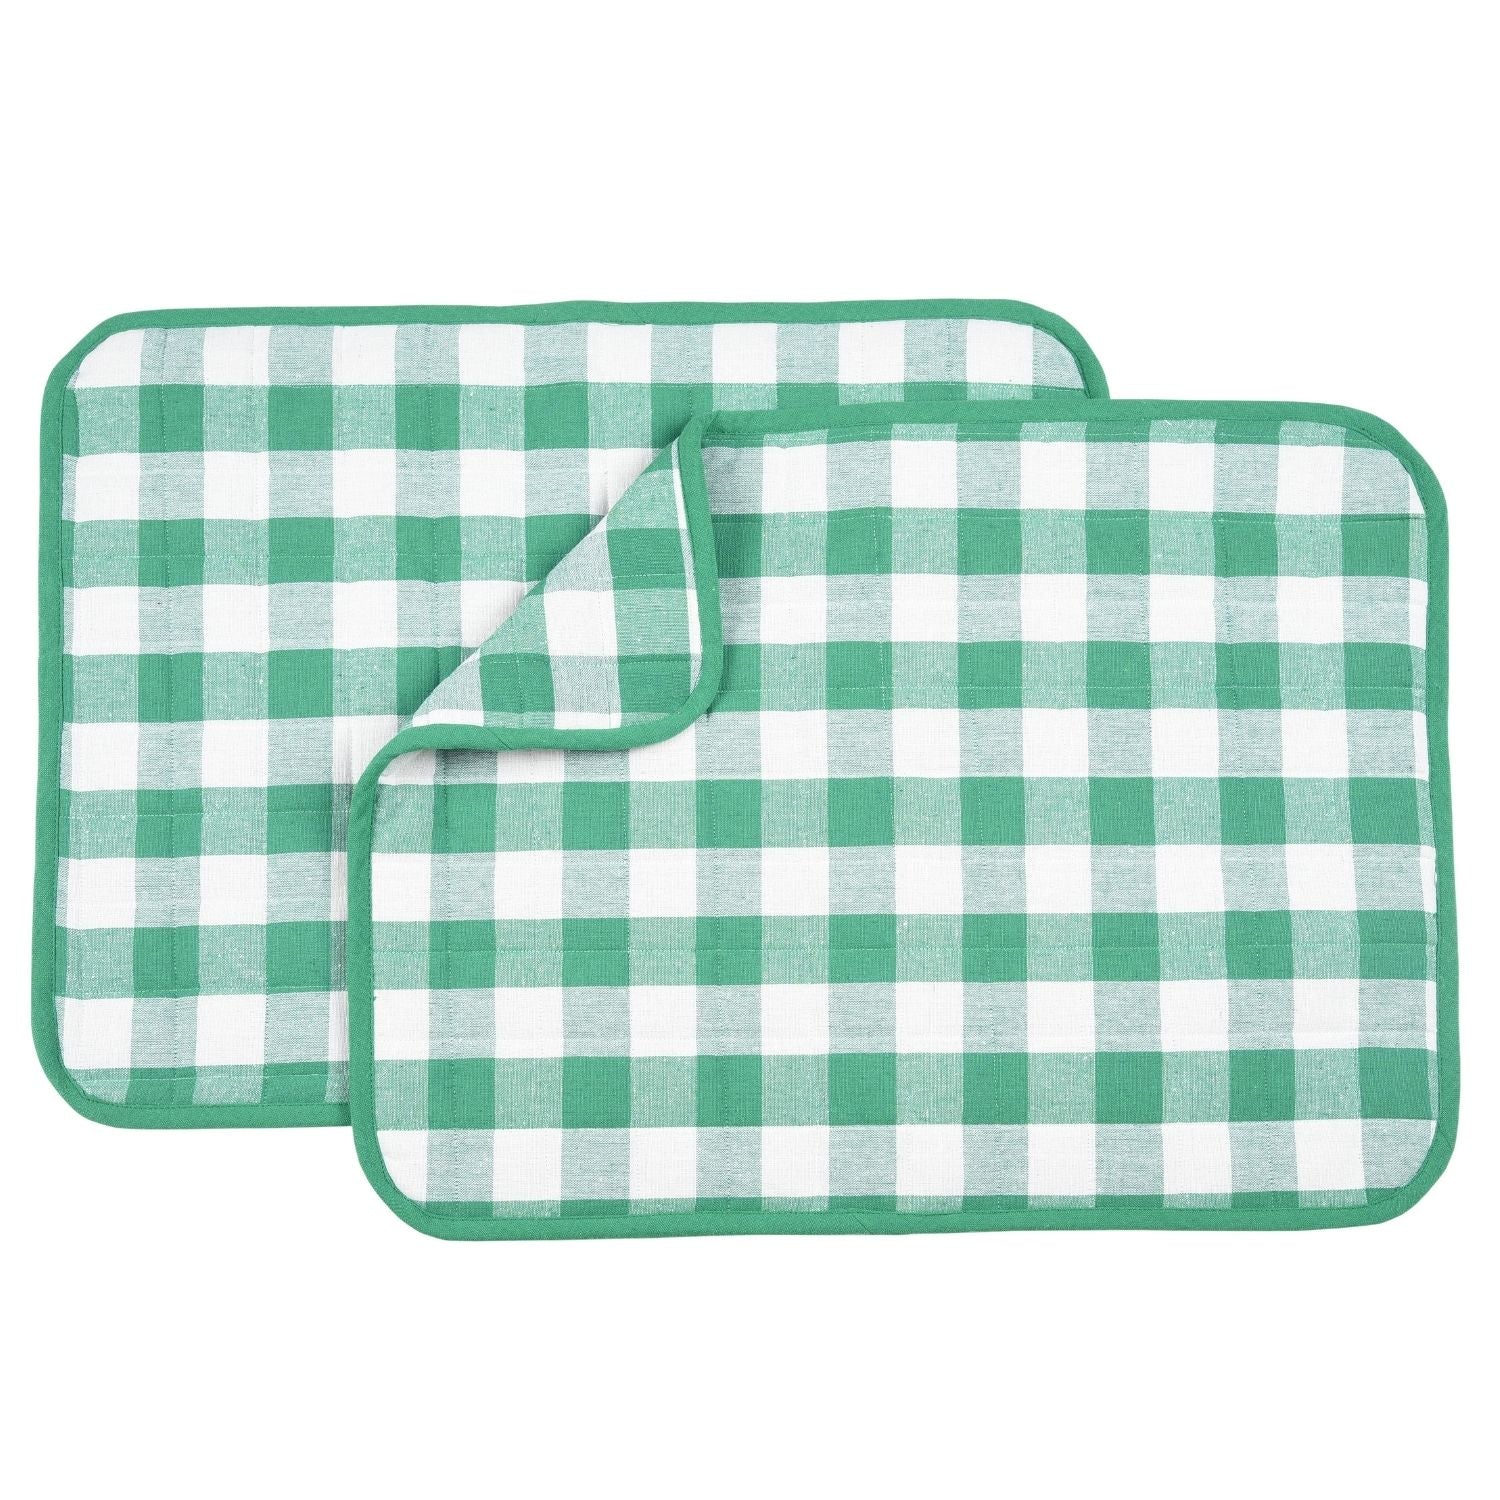 Dish Drying Mat for Kitchen Utensils, Reversible Absorbant Cotton Checks drying Mats, Washable, Counter top Cushion Pad Tableware, 46x61 Cms, Green by Lushomes (18x24 Inches, Set of 2)